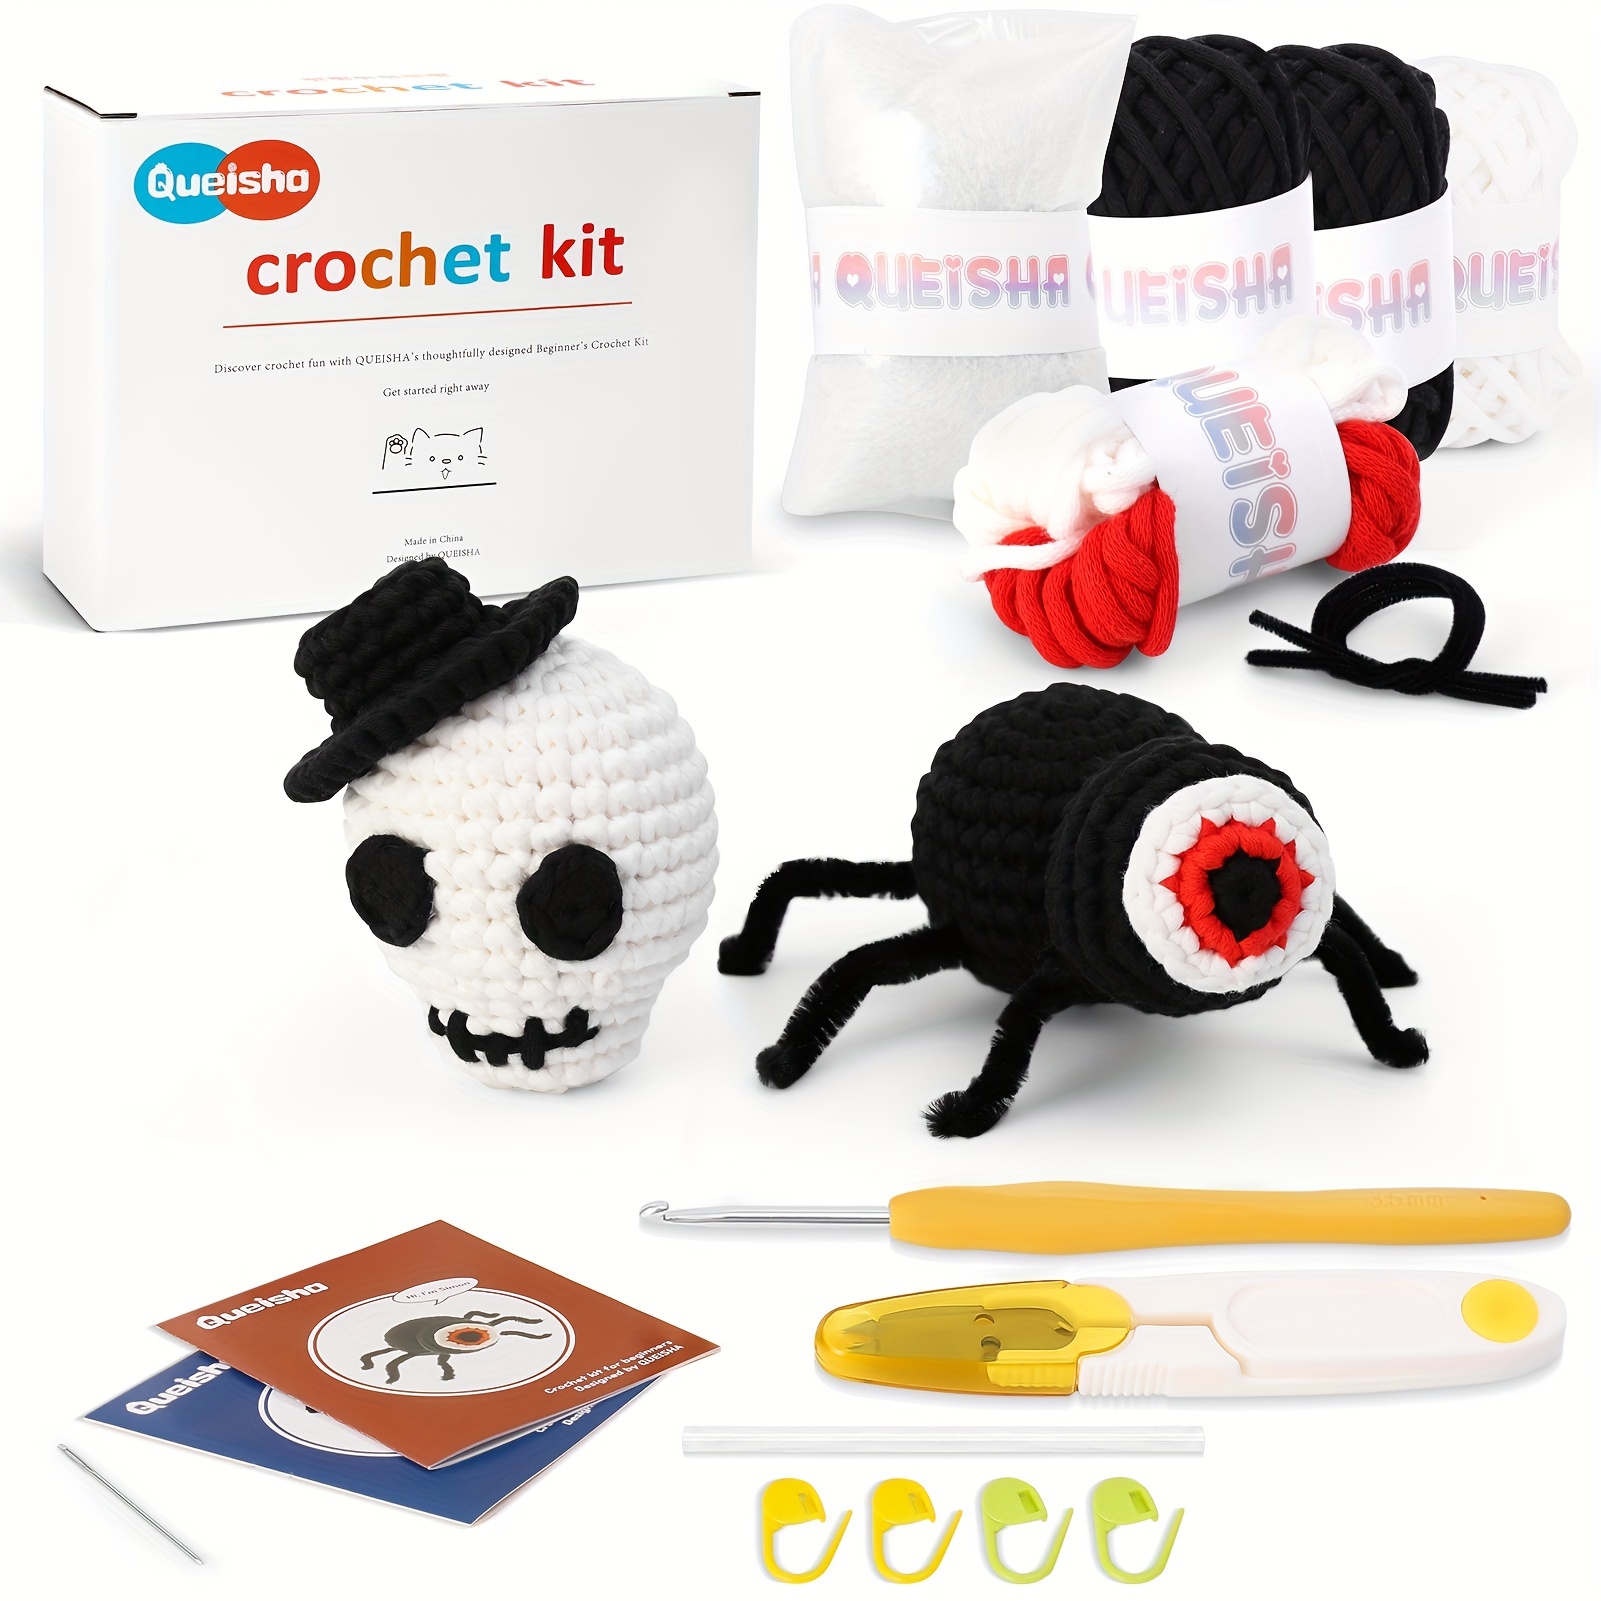 Crochetta Crochet Kit for Beginners - Crochet Starter Kit with Step-by-Step Video Tutorials, Learn to Crochet Kits for Adults and Kids, DIY Knitting